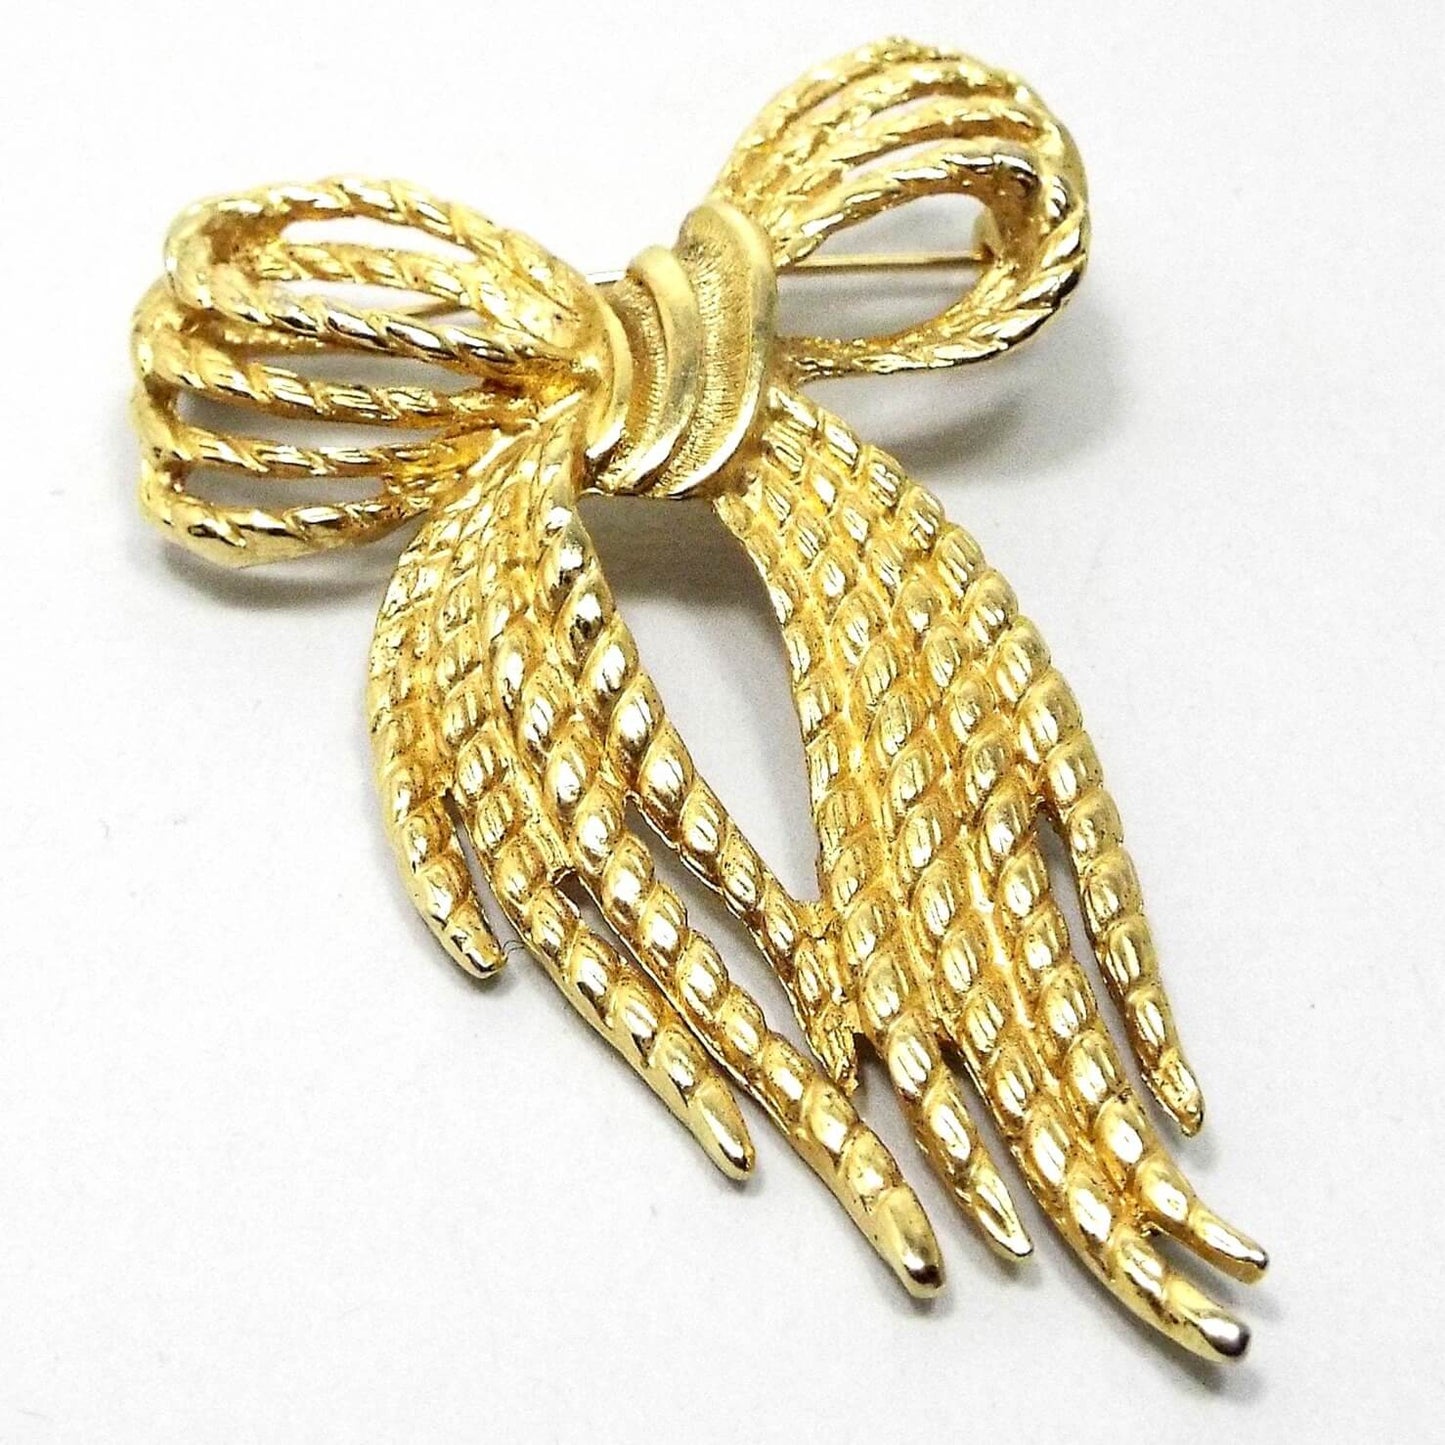 Front view of the retro vintage bow brooch. The metal is gold tone in color and has a textured appearance. It is shaped like a tied Holiday bow.